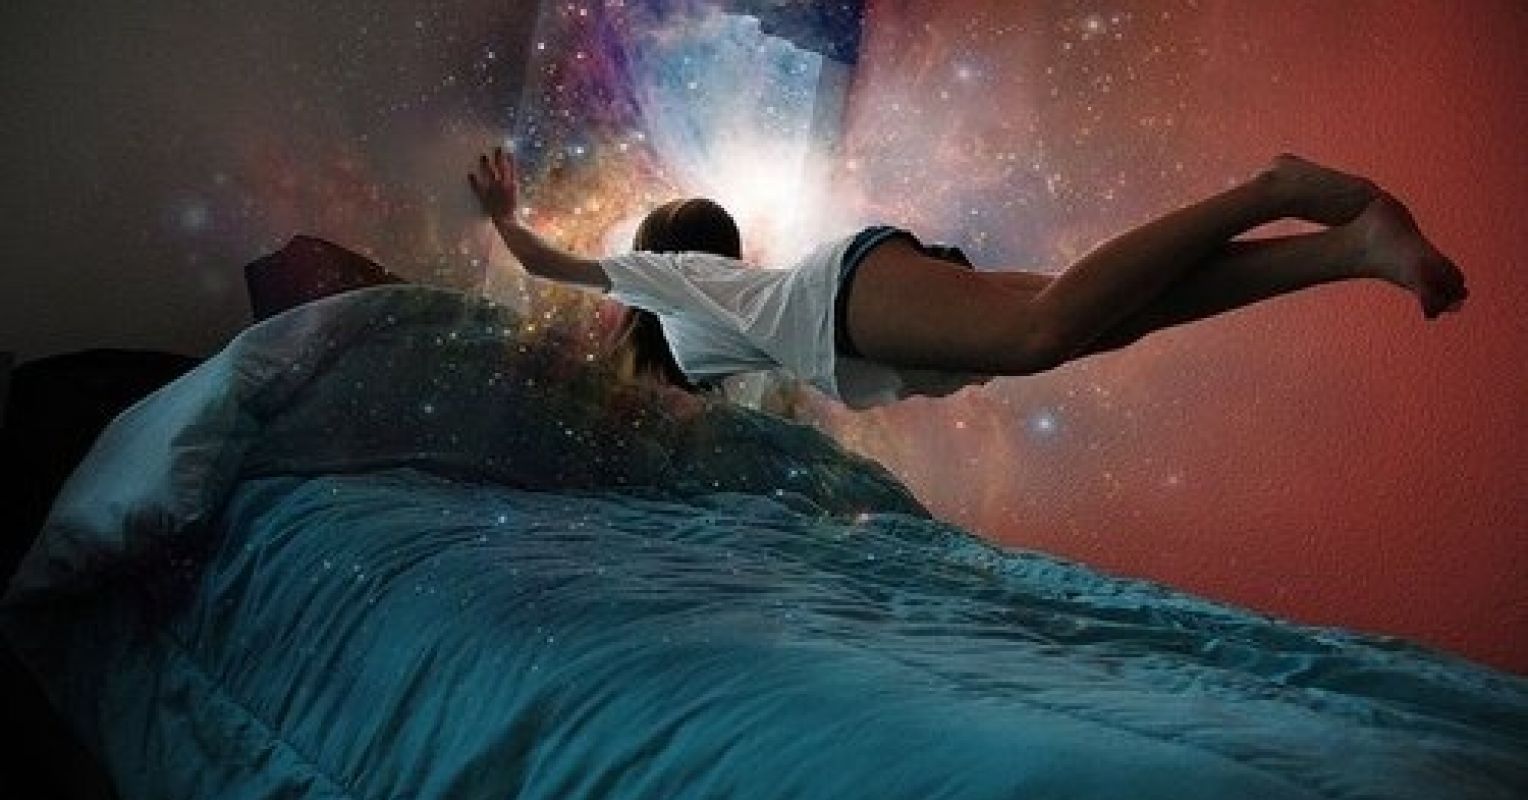 A lady hovering above her bed while dreaming